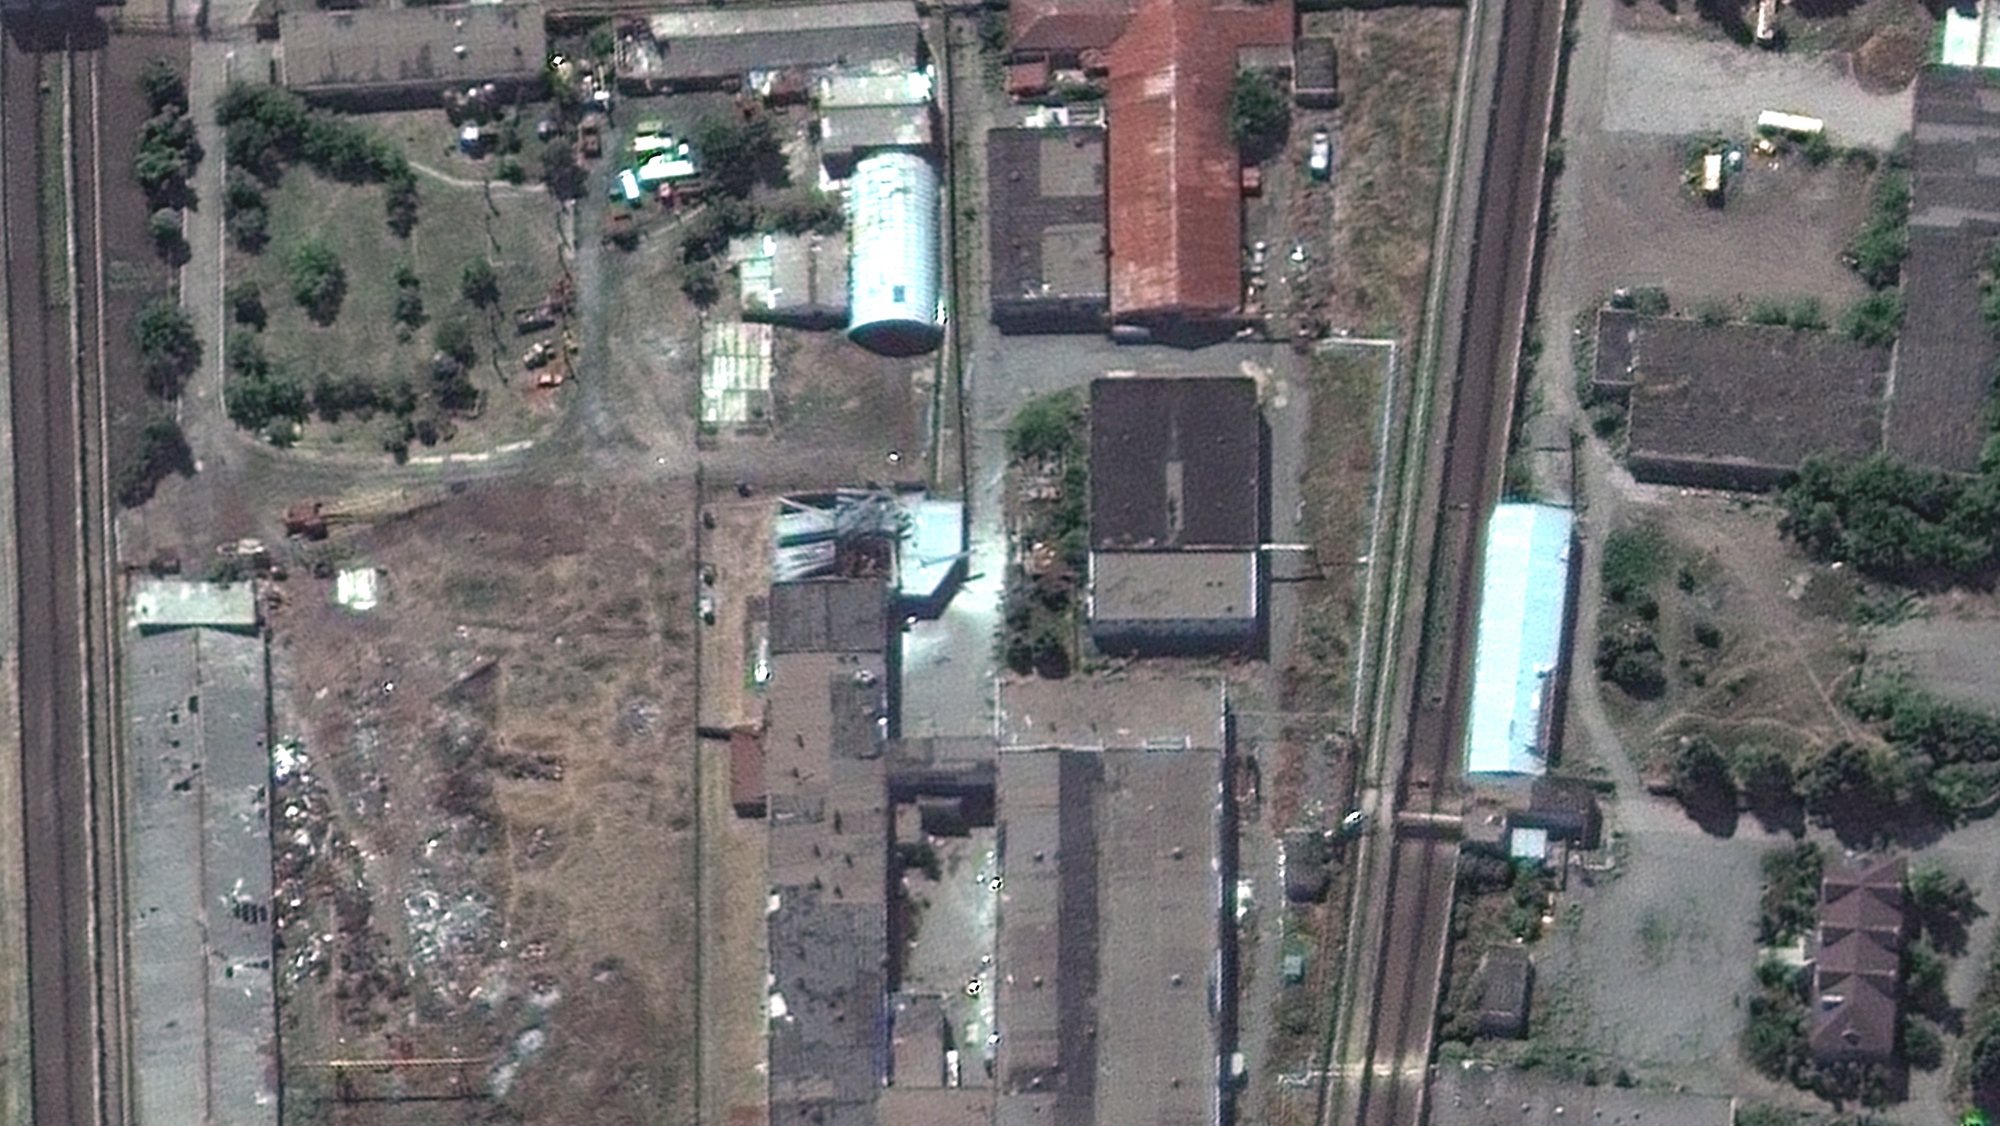 epa10099593 A handout satellite image made available by Maxar Technologies shows the Olenivka prison in the Donetsk region of Ukraine where more than 50 people reportedly died following an attack and explosion at the prison early on 29 July (issued 31 July 2022). Russian officials said that 53 Ukrainian POWs were killed in the attack on the compound located in the DPR-controlled region, for which both Ukraine and Russia blame each other. Russian troops on 24 February entered Ukrainian territory, starting a conflict that has provoked destruction and a humanitarian crisis.  EPA/MAXAR TECHNOLOGIES HANDOUT -- MANDATORY CREDIT: SATELLITE IMAGE 2022 MAXAR TECHNOLOGIES -- THE WATERMARK MAY NOT BE REMOVED/CROPPED -- HANDOUT EDITORIAL USE ONLY/NO SALES